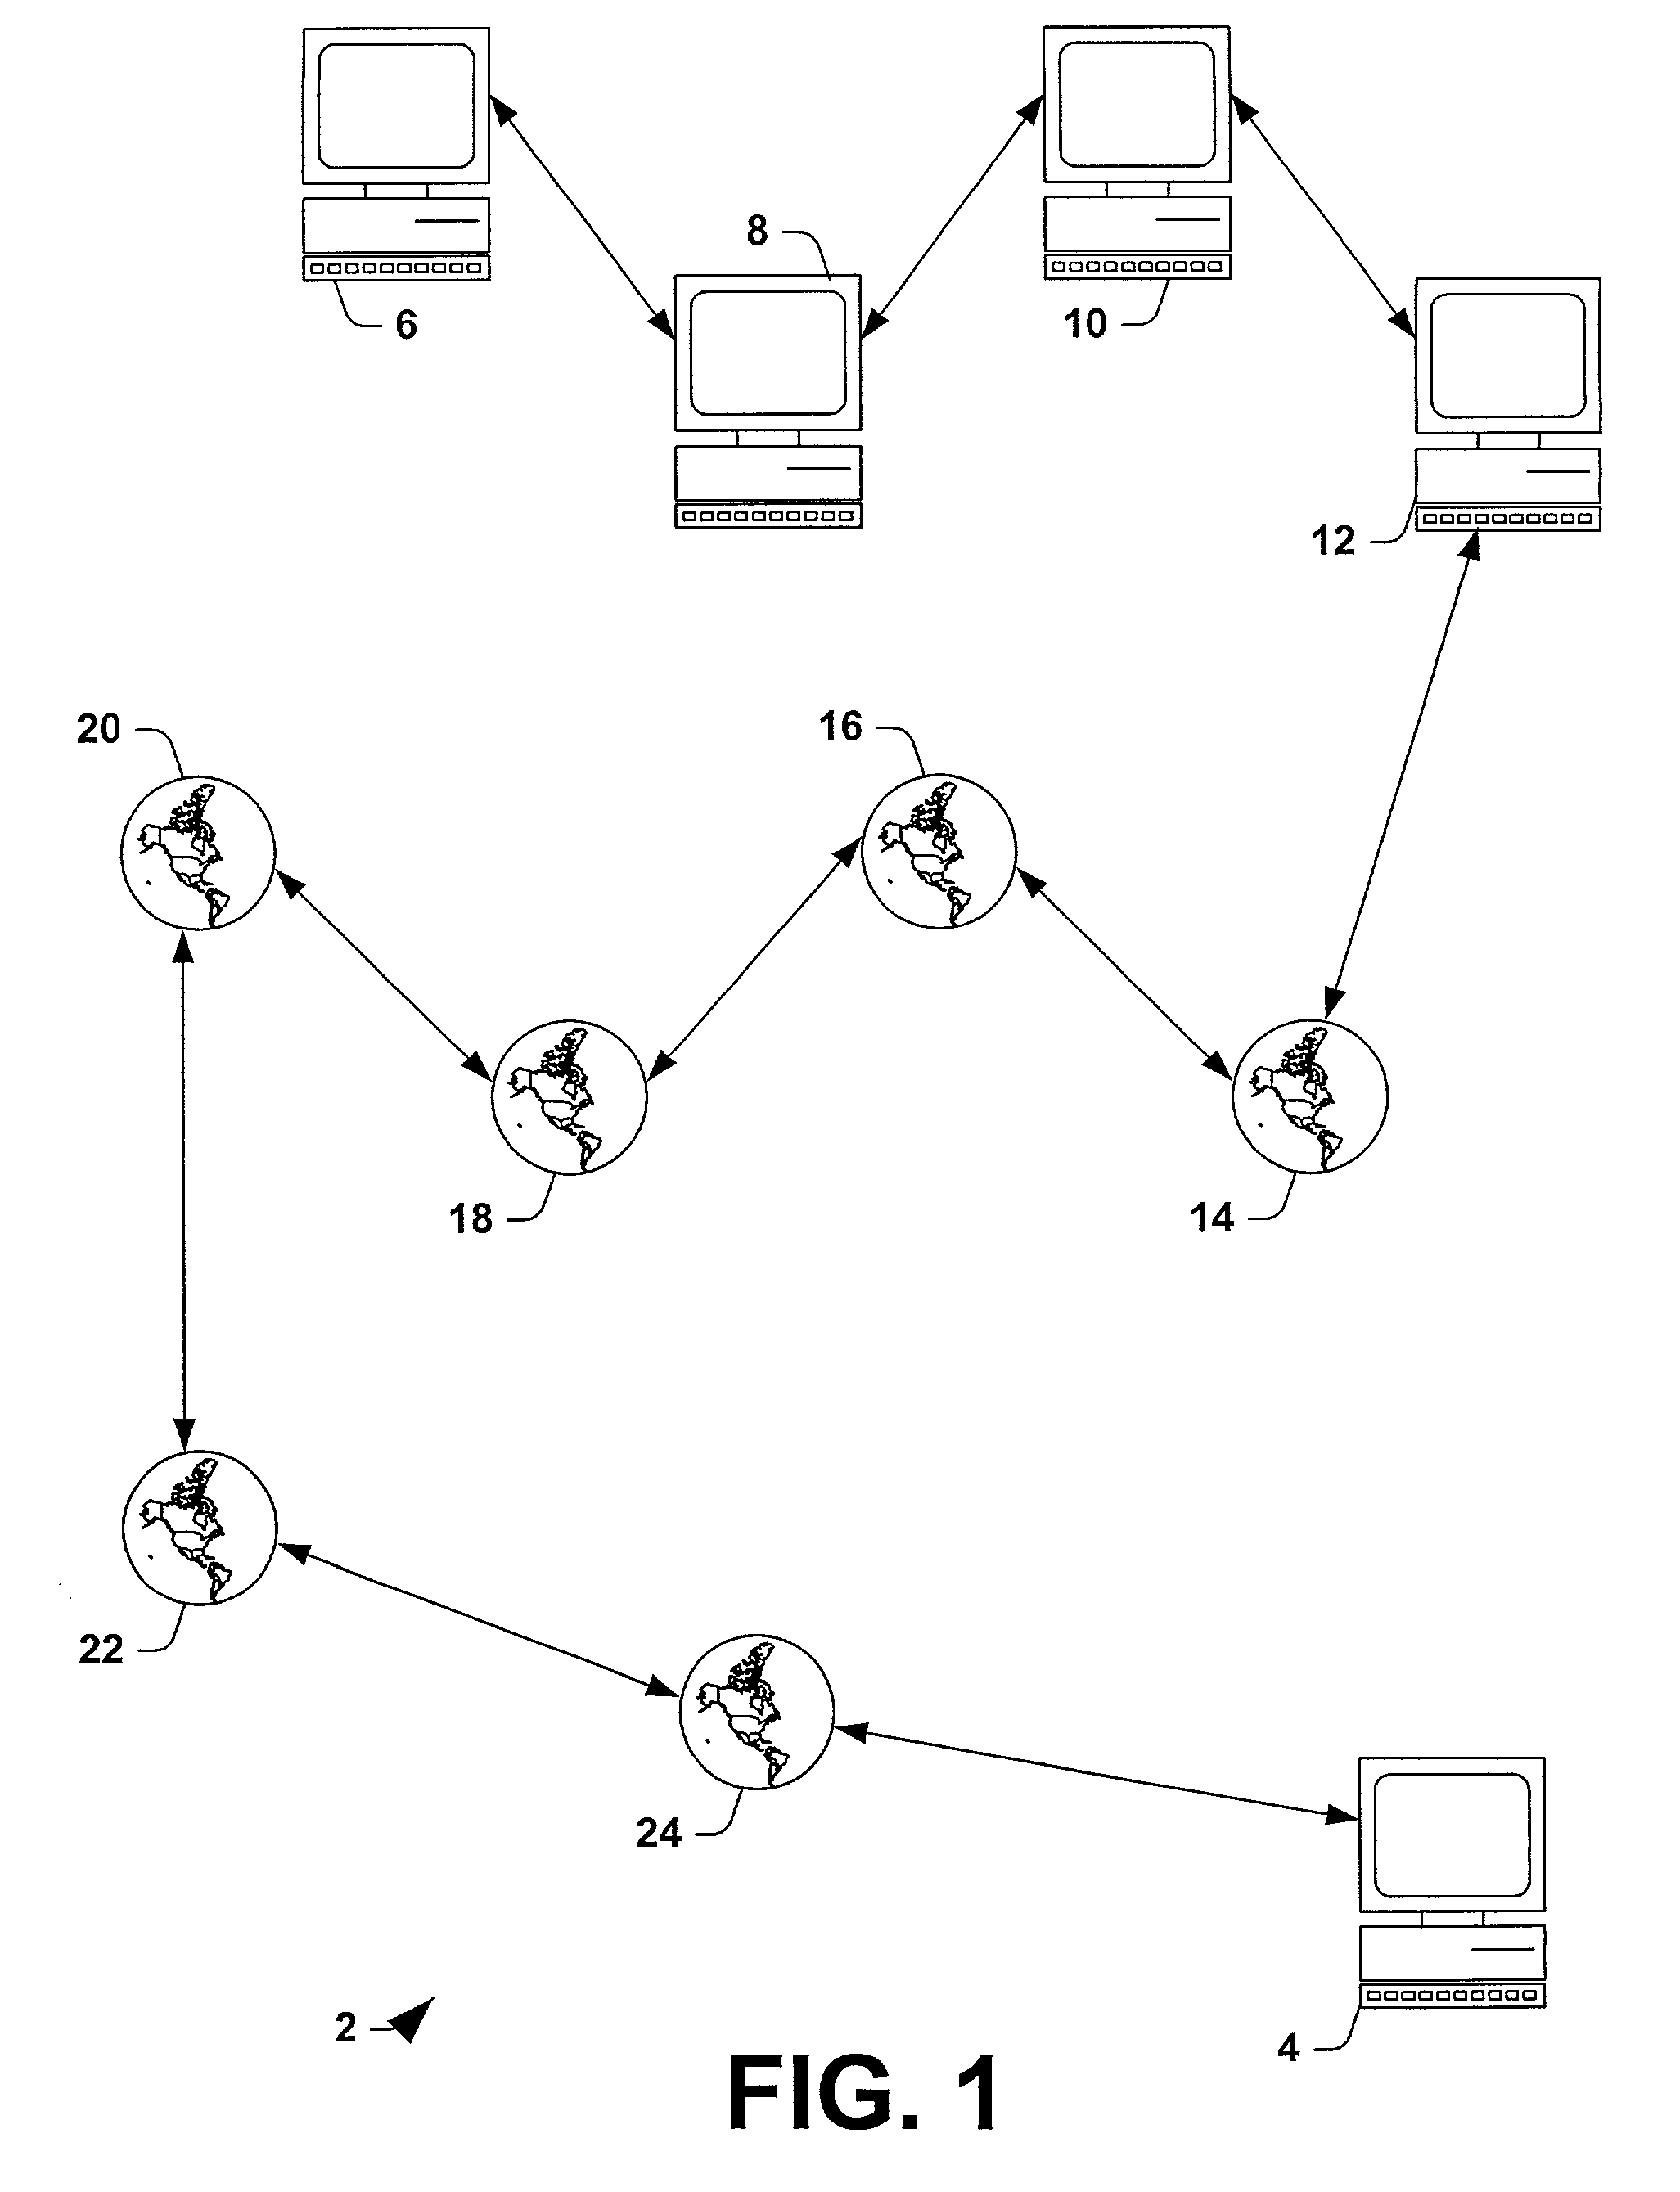 System and method for determining the geographic location of internet hosts